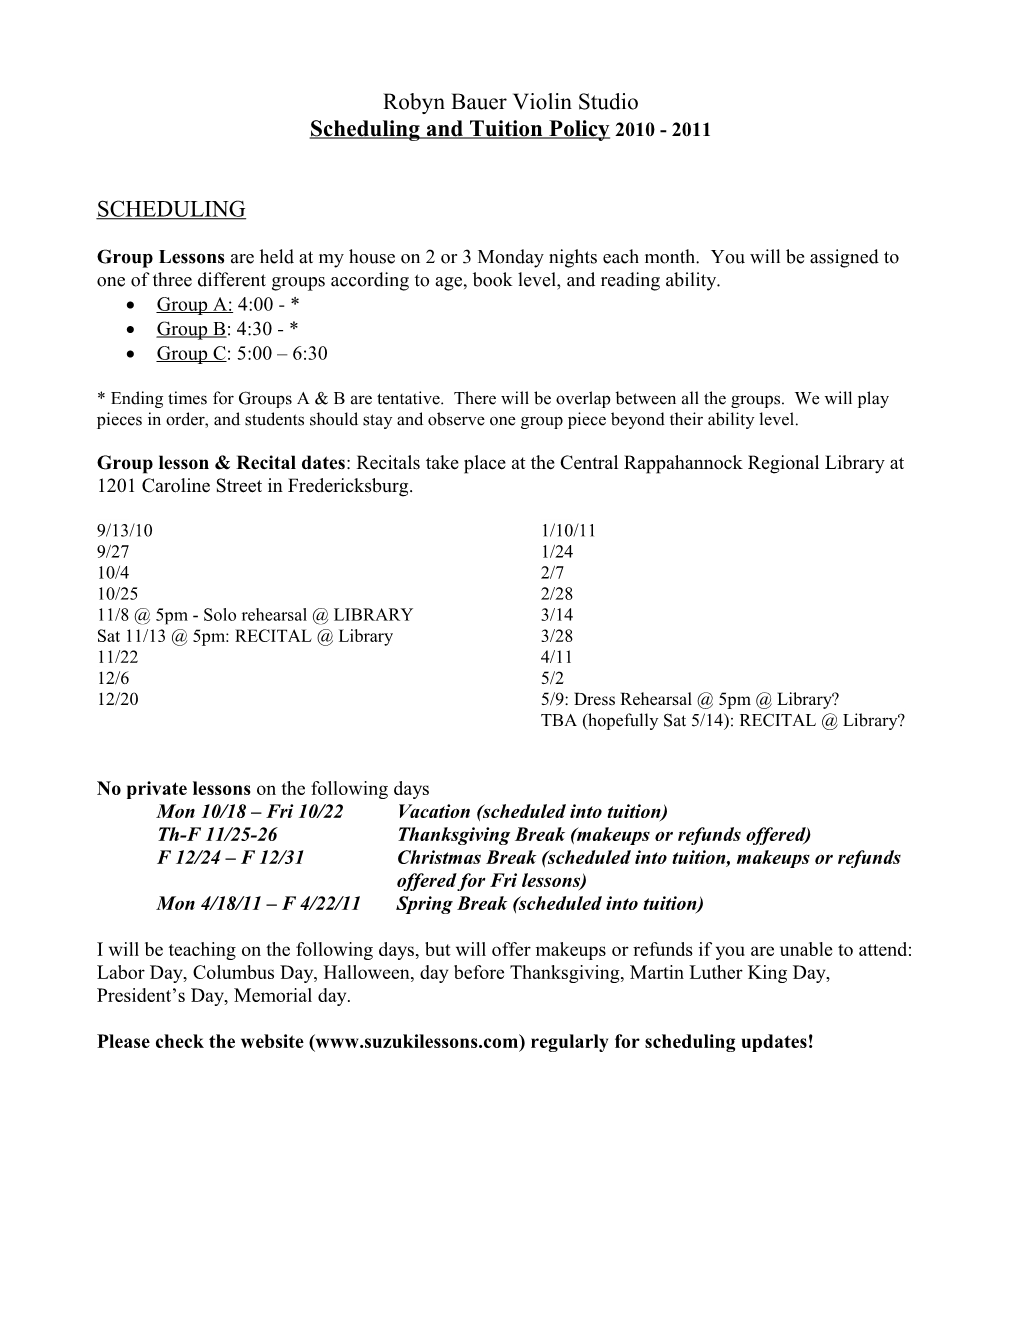 Suzuki Violin Scheduling and Tuition Policy As Of: 12/12/06